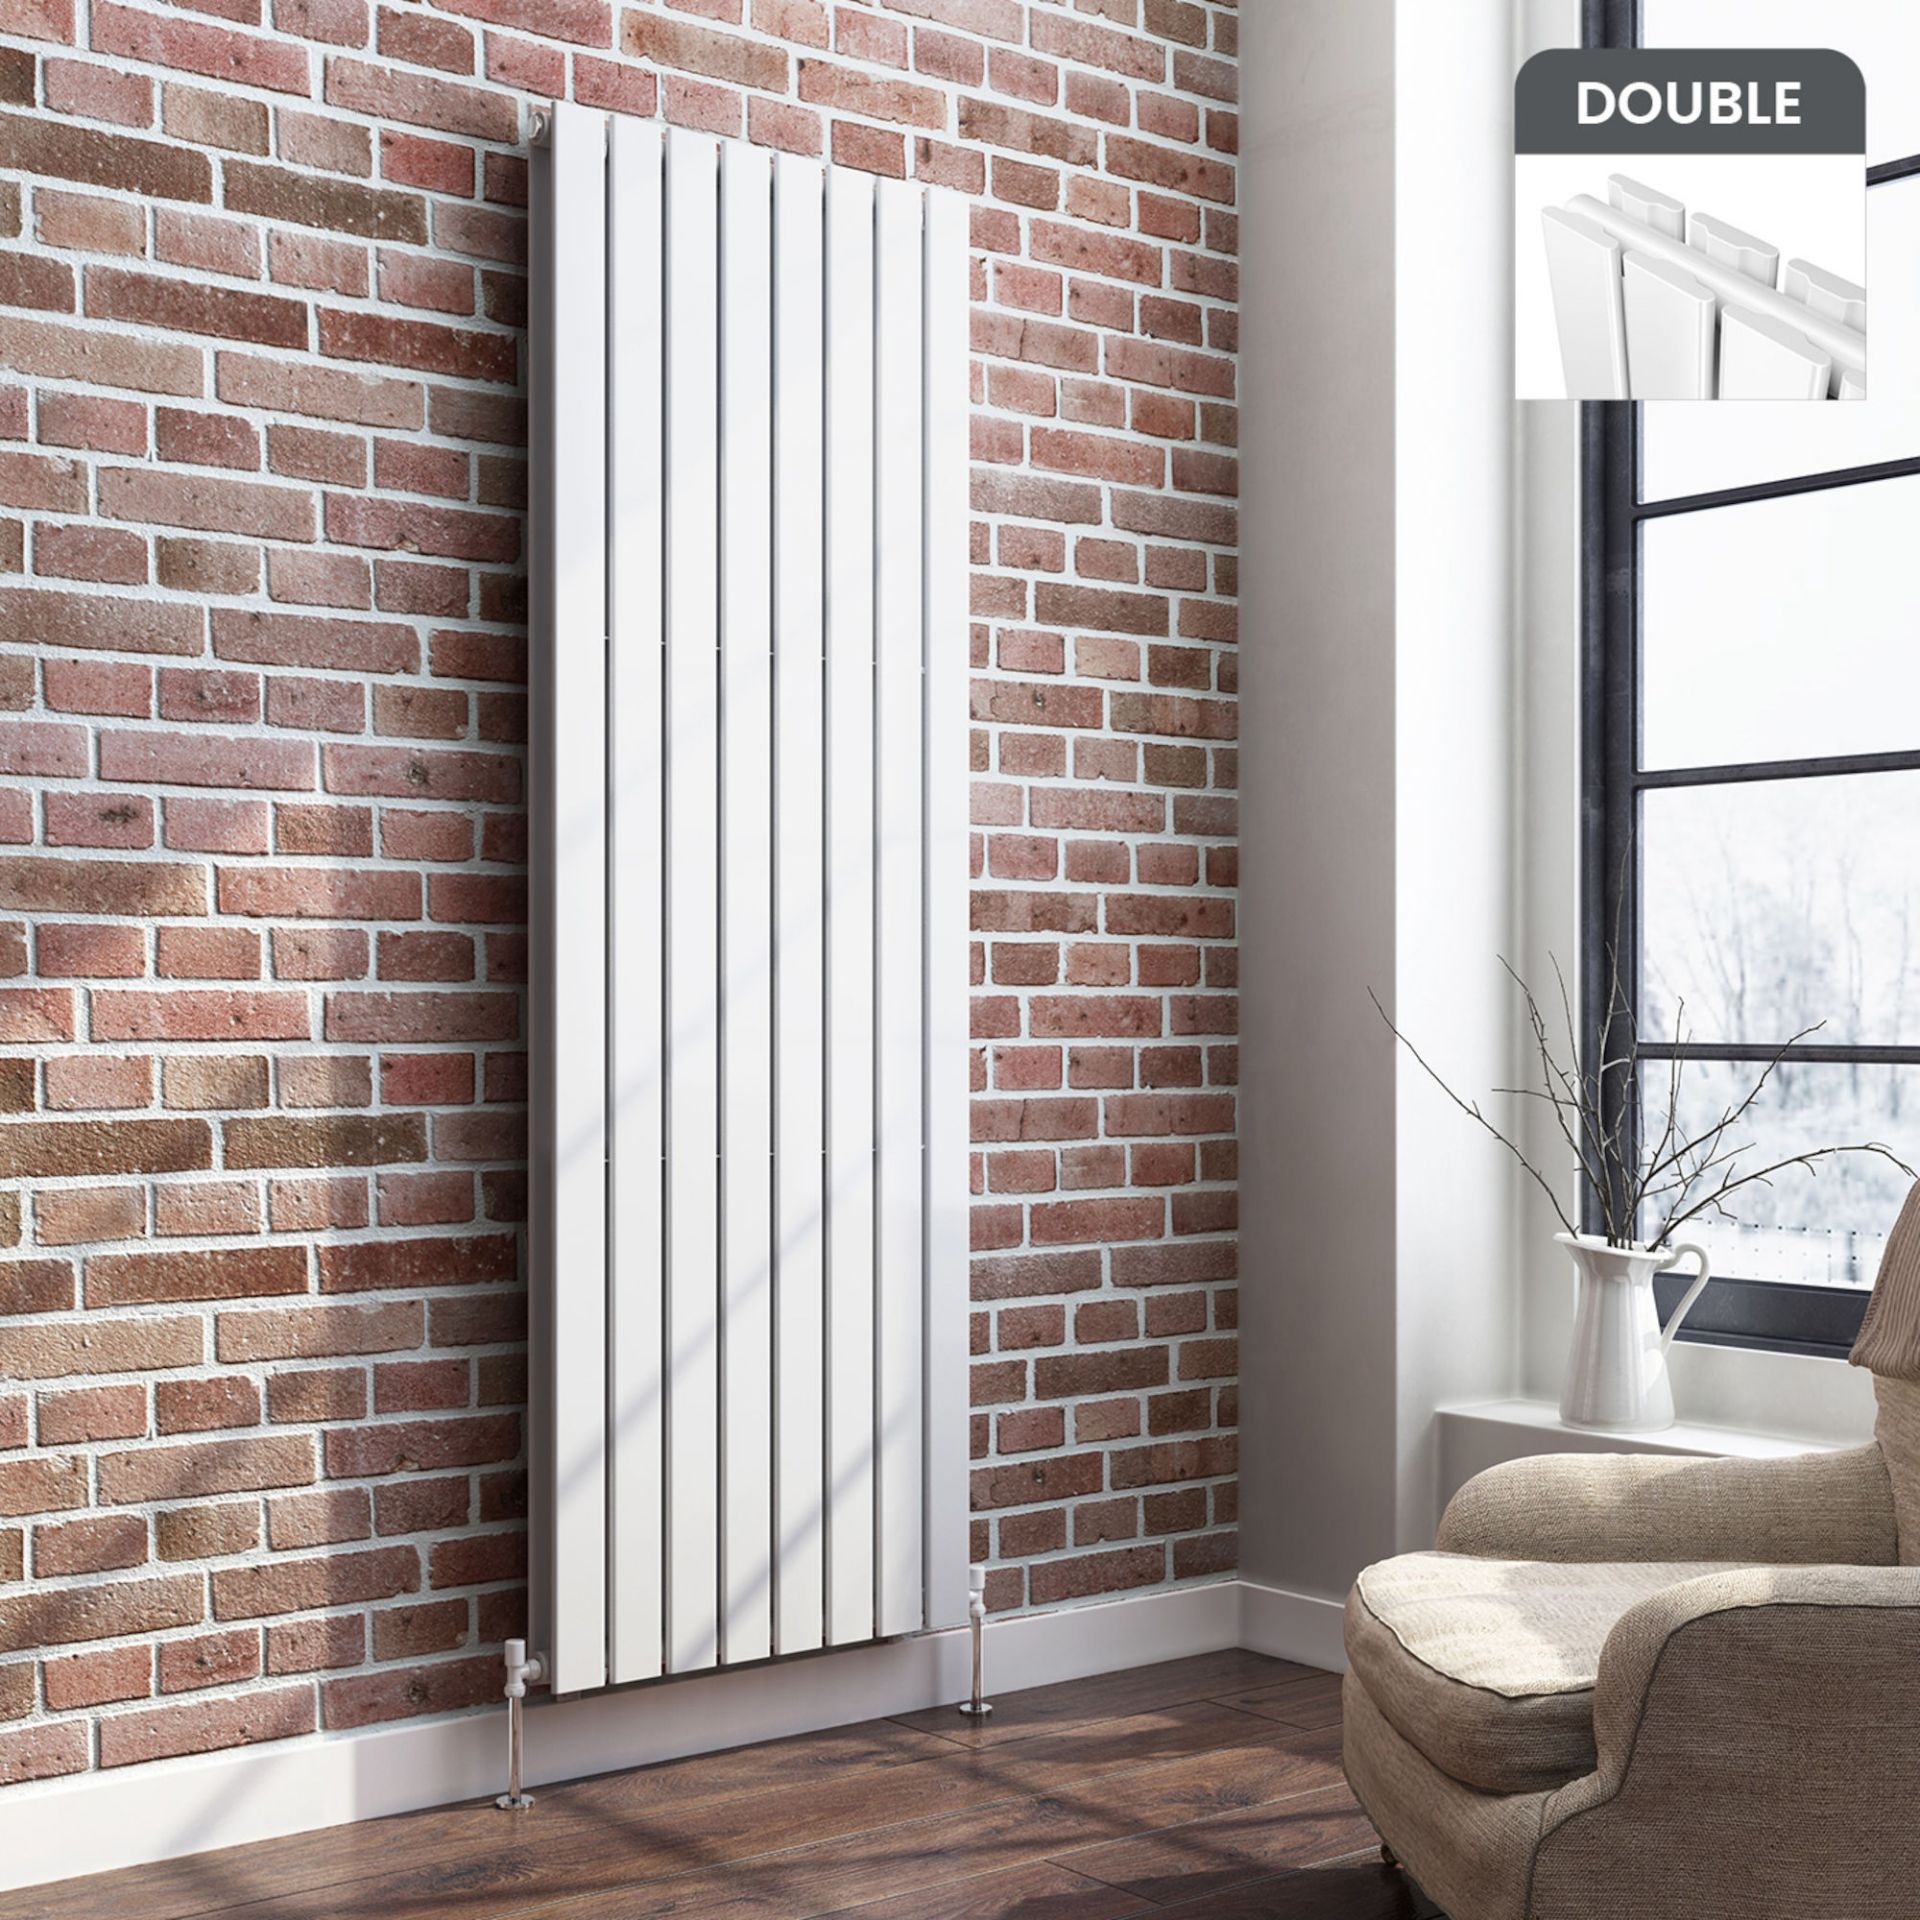 (MT247) 1800x608mm Gloss White Double Flat Panel Vertical Radiator - Premium. RRP £499.99. Made from